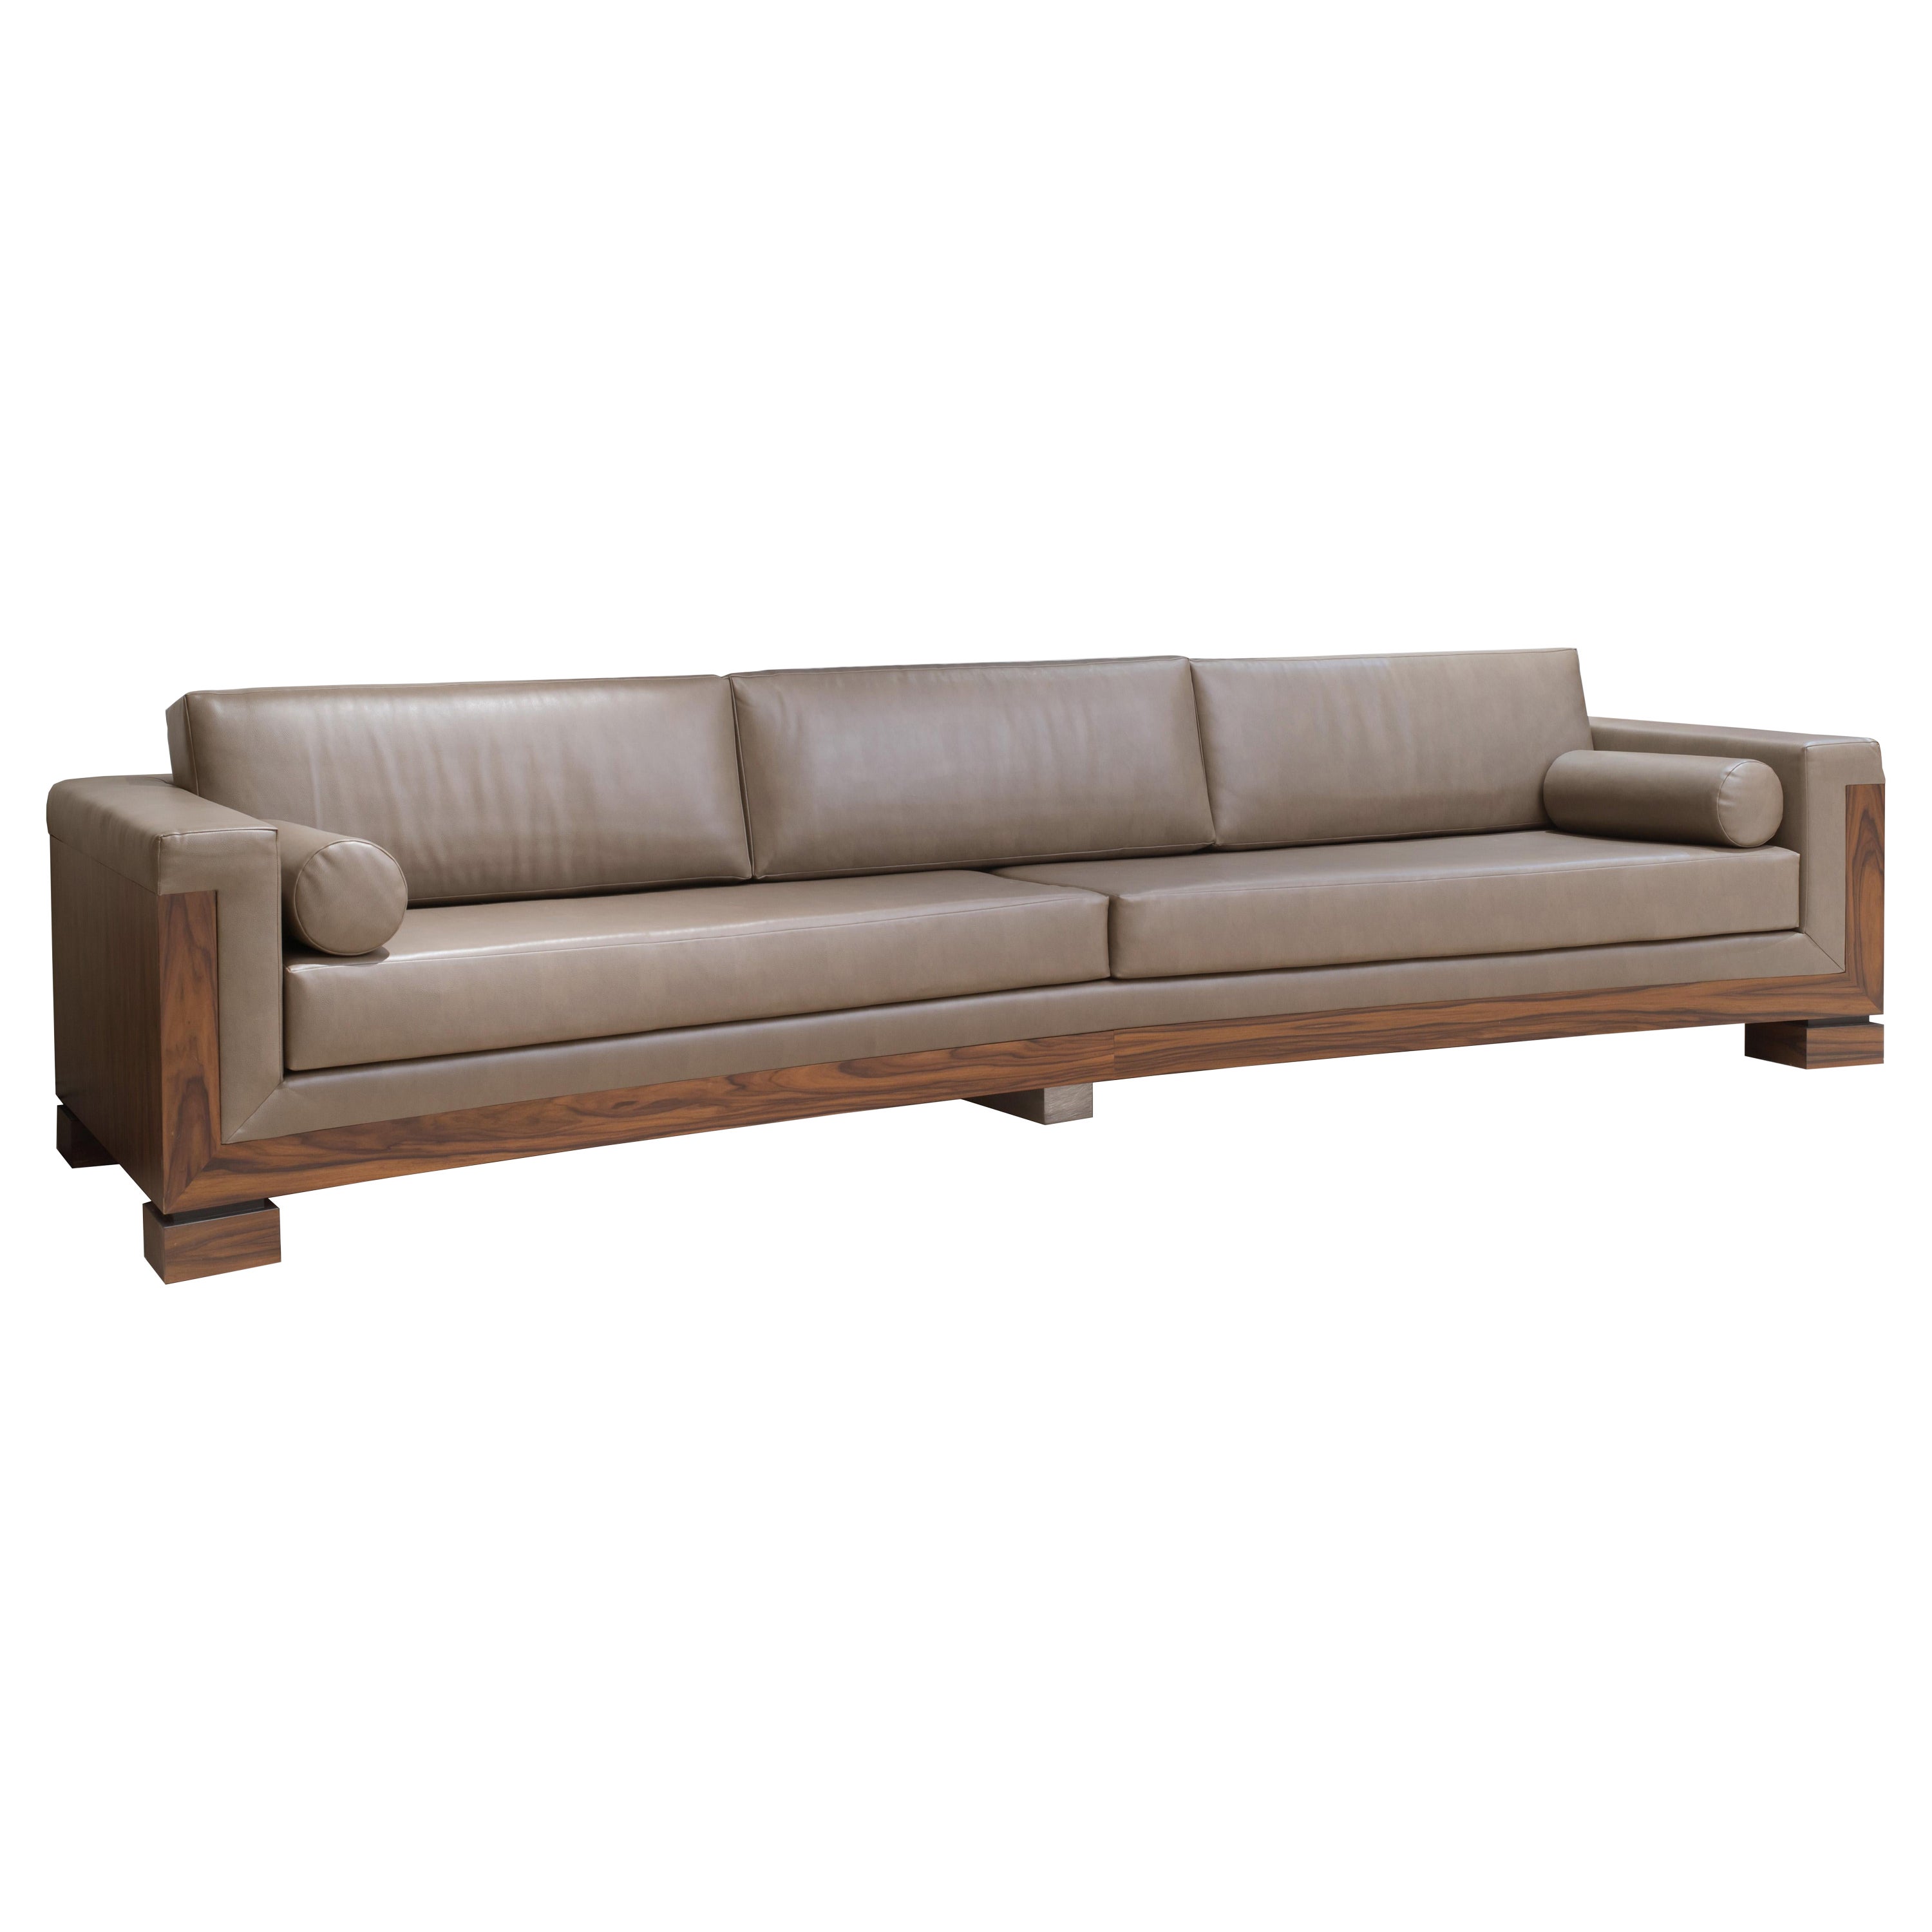 Contemporary Extra Long Taupe Leather Sofa